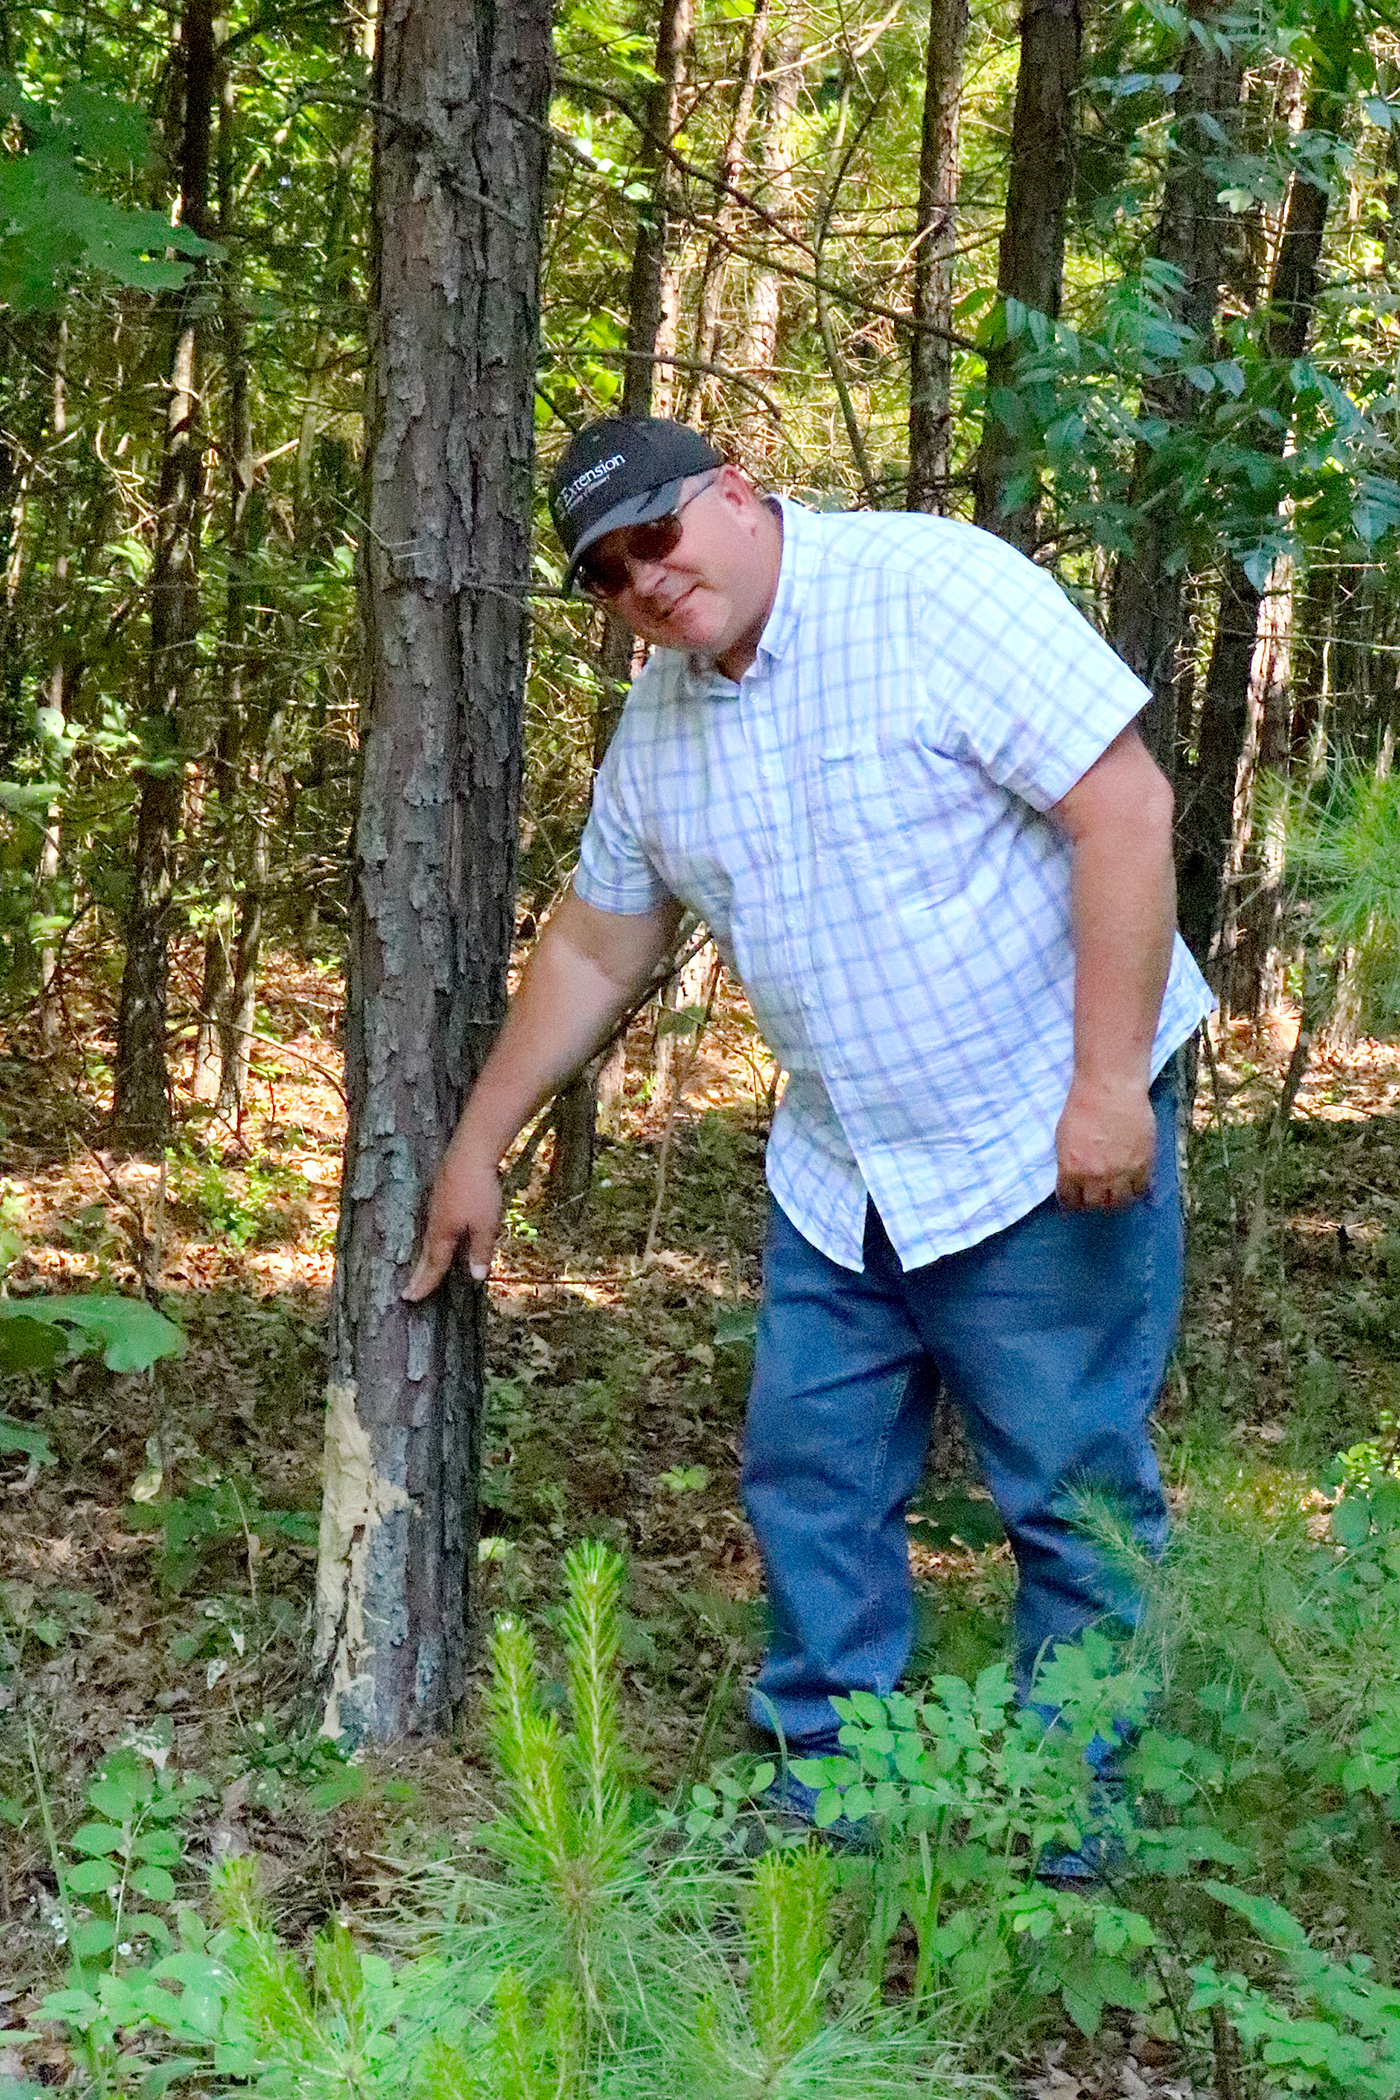 MU Extension feral hog outreach educator Kevin Crider points out where feral hogs have damaged trees. Hogs rub their bristly bodies on trees after wallowing in waterways. (Photo by Linda Geist.)